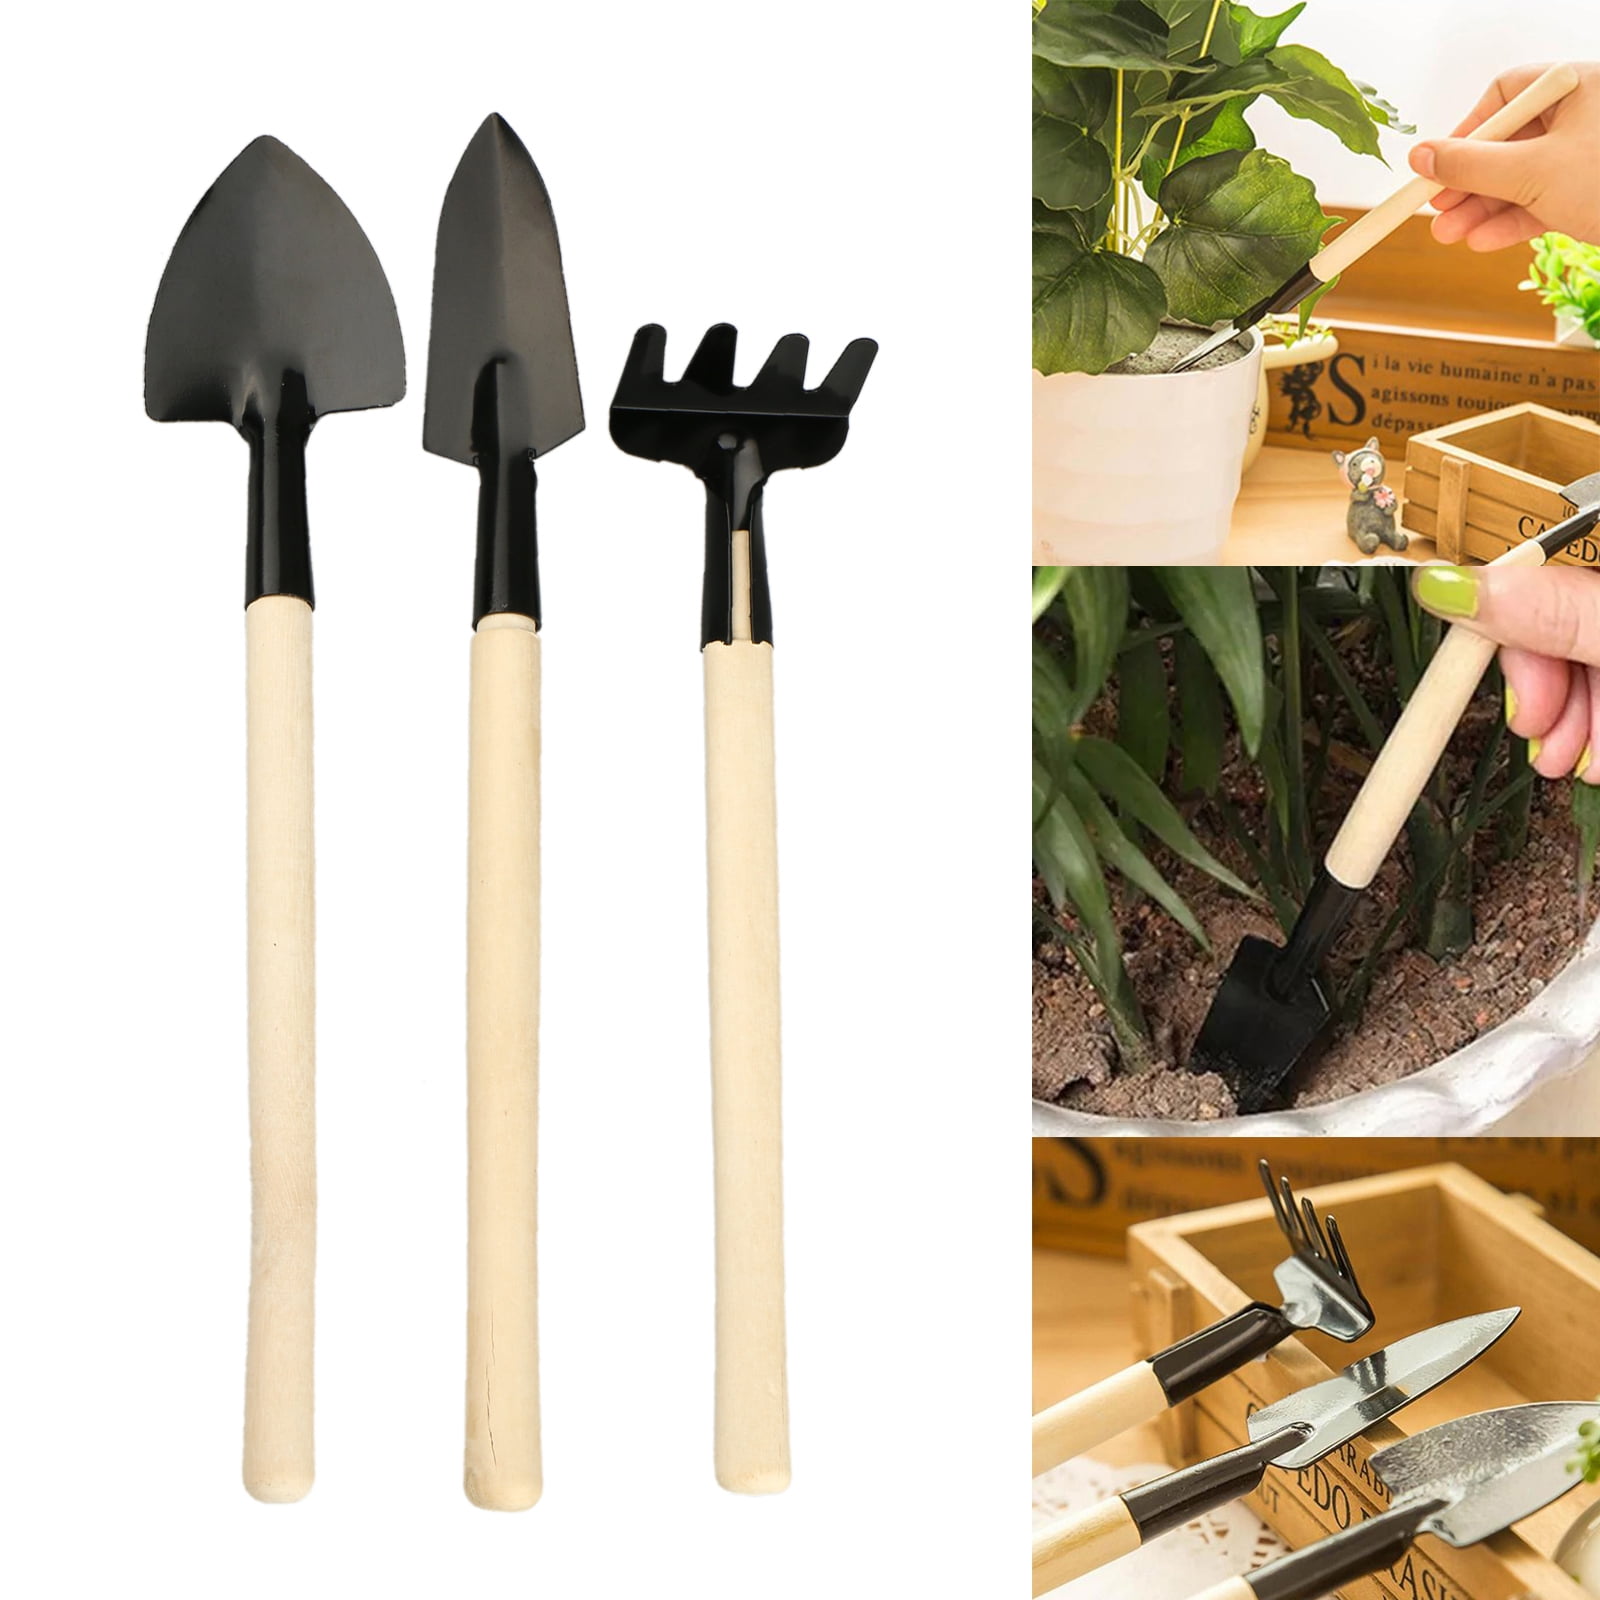 Herbs Terrariums and Planting Succulents Bonsai 8.9 x 1.1 inch Garden Gifts for Men Women Metal Shovel with Wooden Handle Small Transplant Hand Tool for Seedlings Mini Shovel Garden Tool